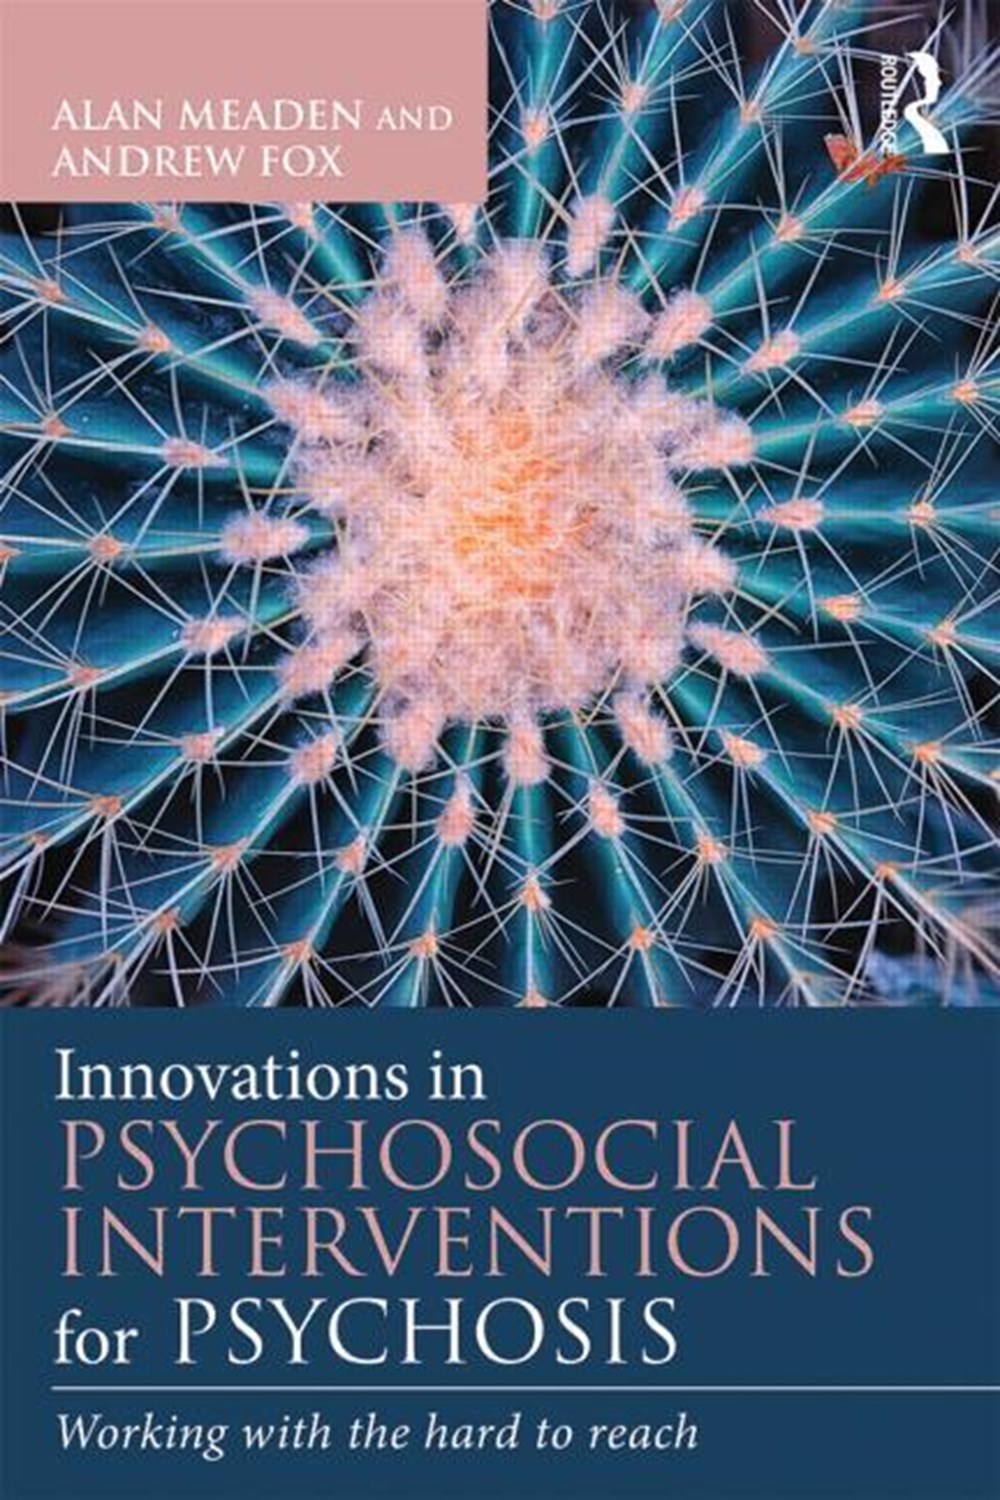 Innovations in Psychosocial Interventions for Psychosis Working with the hard to reach